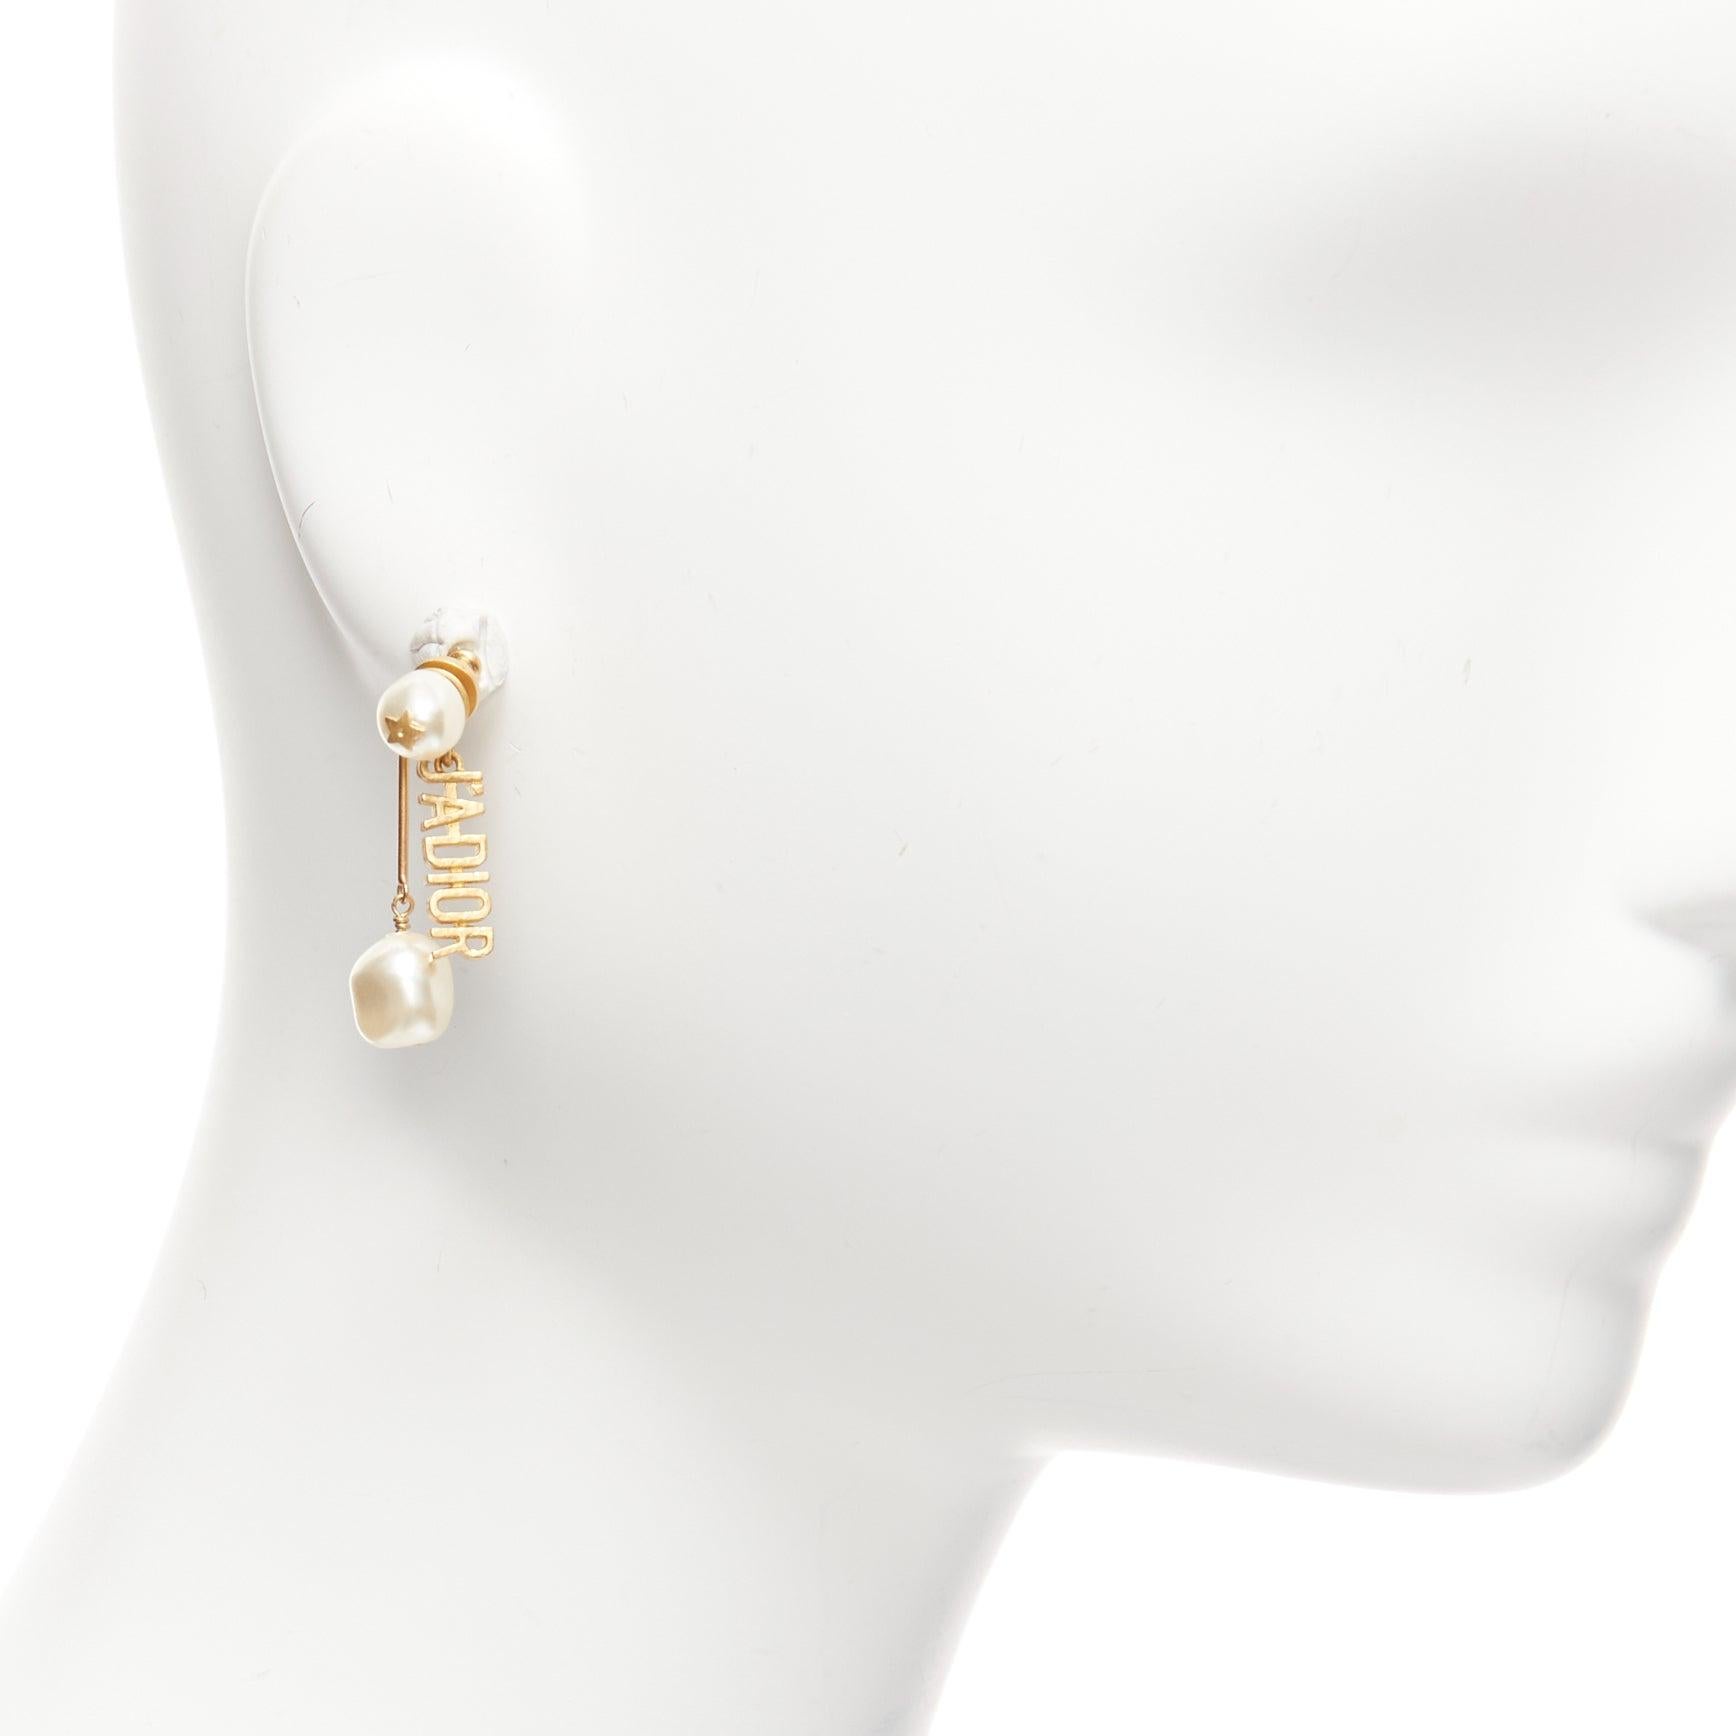 DIOR Tribale J'adior gold faux pearl logo drop star pin asymmetric stud earrings pair
Reference: AAWC/A00898
Brand: Dior
Designer: Maria Grazia Chiuri
Collection: J'adior Tribale
Material: Faux Pearl, Metal
Color: Gold, Pearl
Pattern: Solid
Closure: